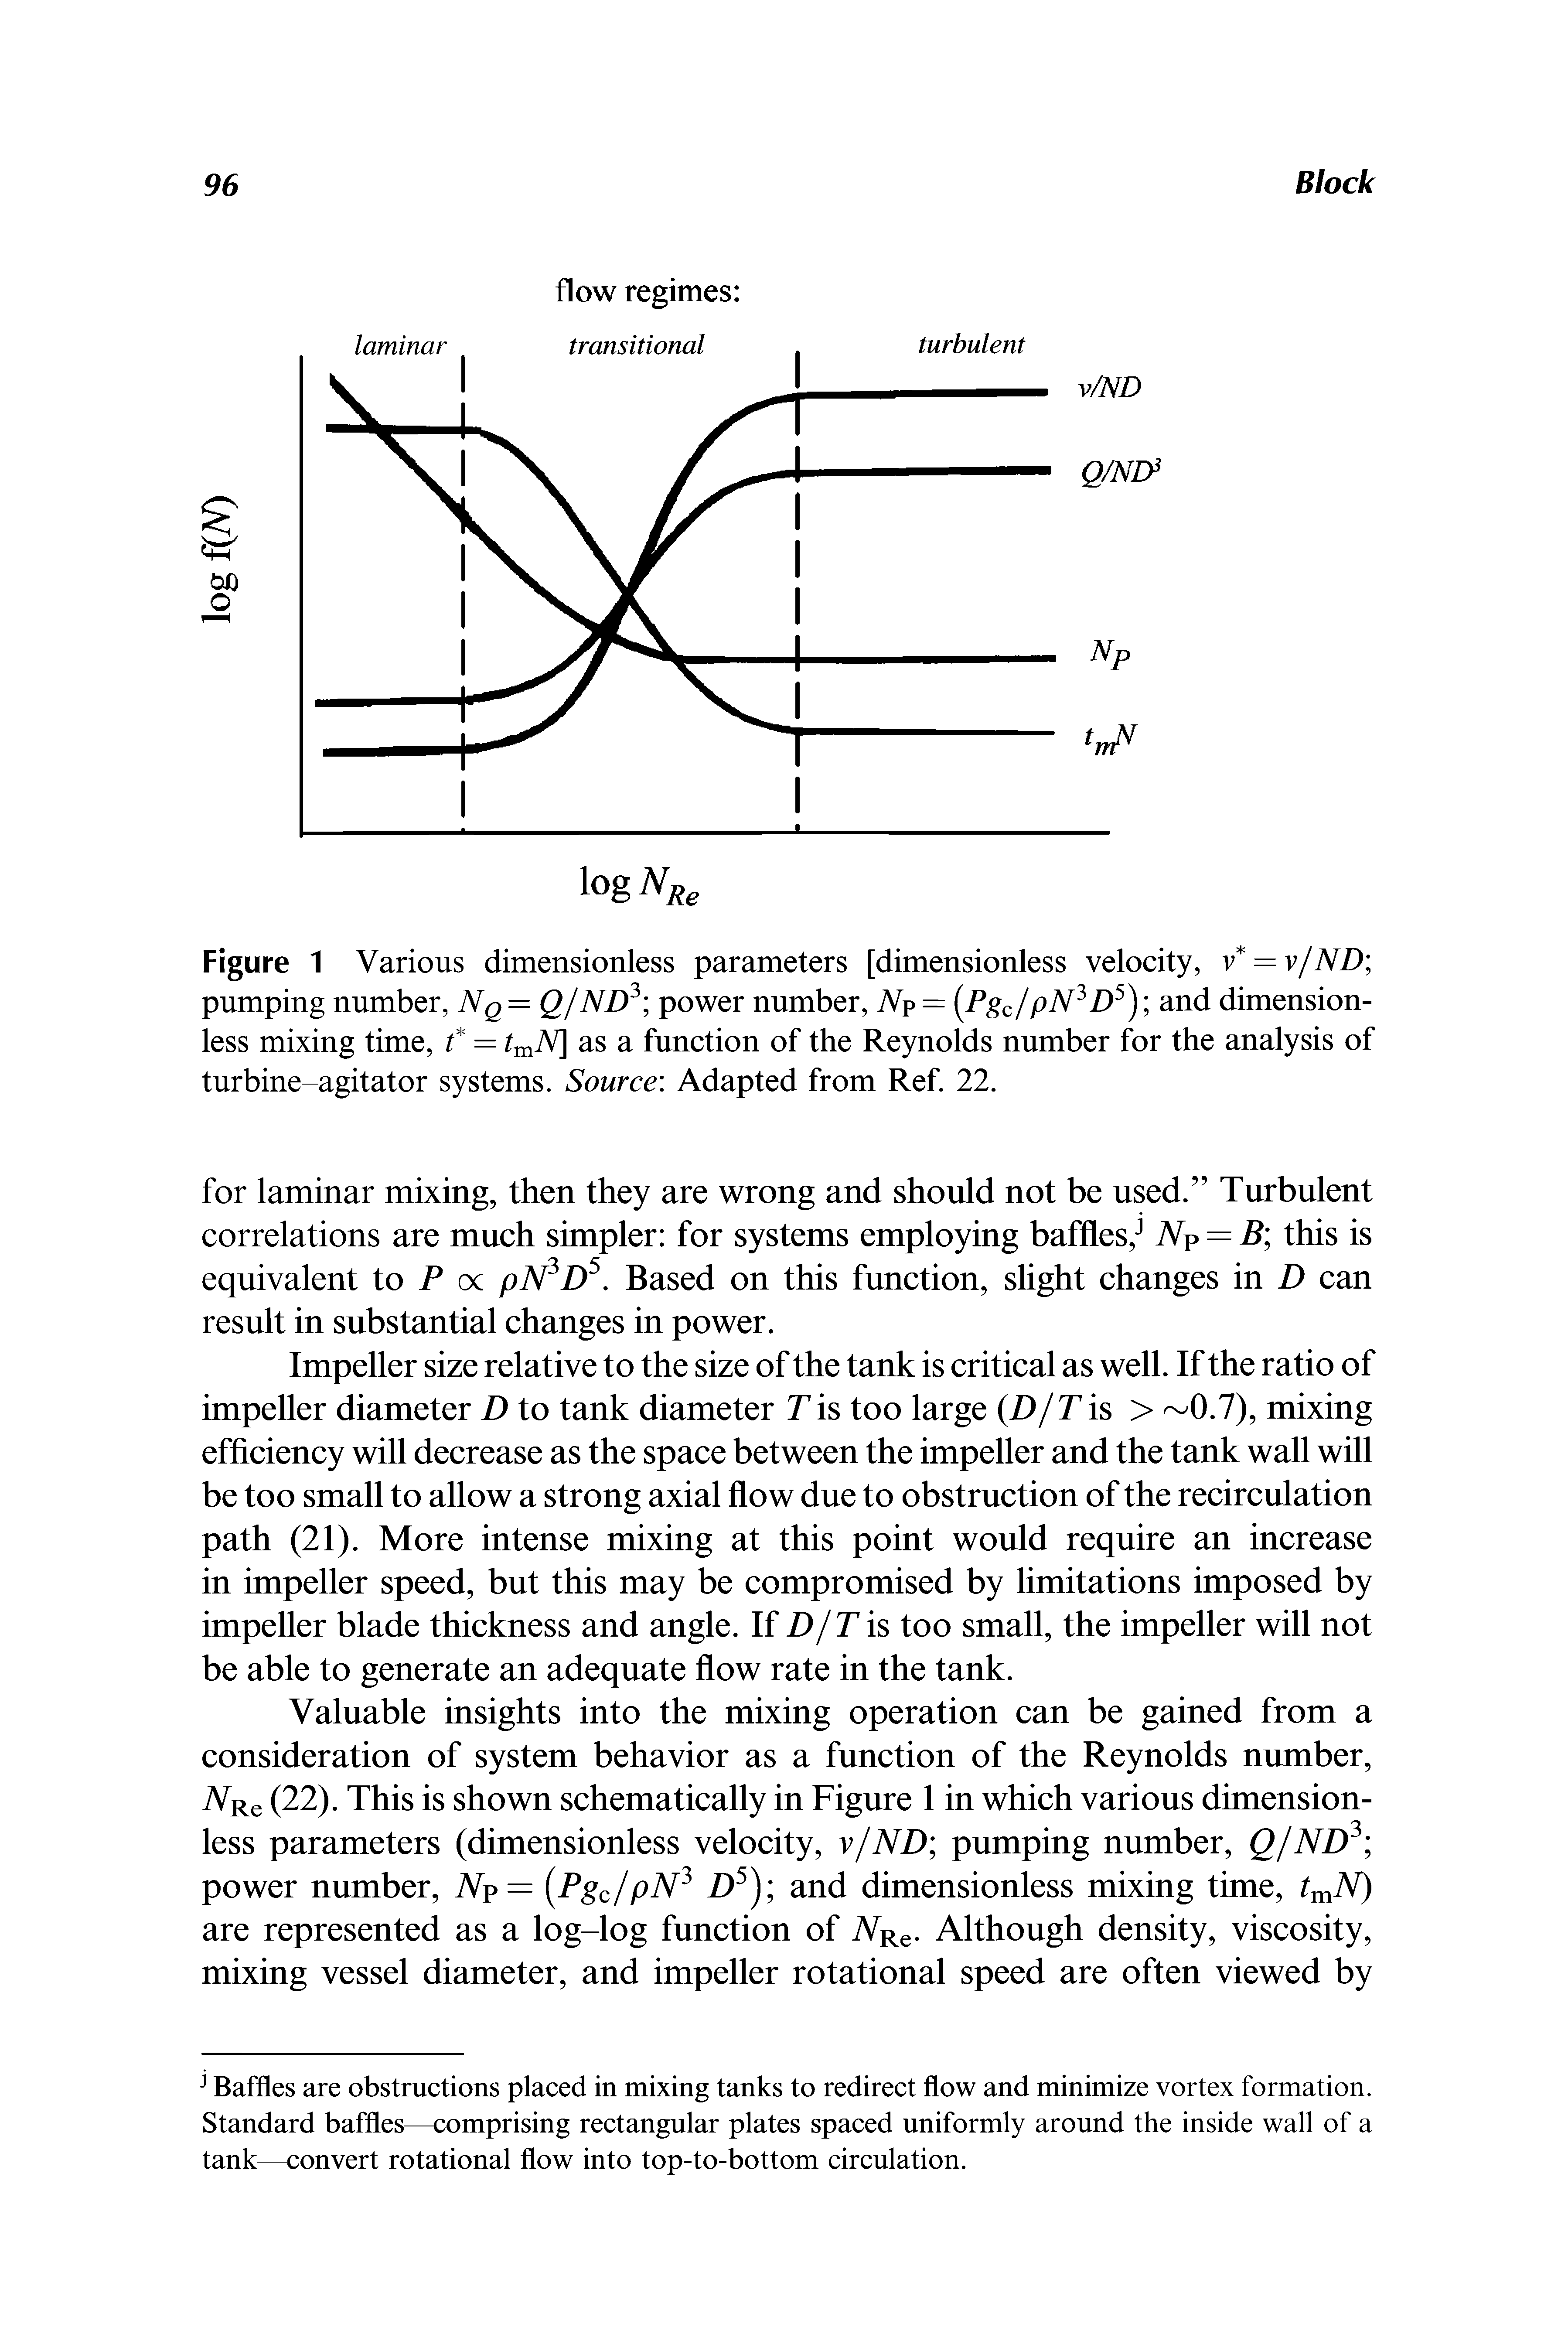 Figure 1 Various dimensionless parameters [dimensionless velocity, v = v/ND pumping number, Nq = Q/ND power number, Np=[Pgc/pN D ) and dimensionless mixing time, f = as a function of the Reynolds number for the analysis of turbine-agitator systems. Source Adapted from Ref. 22.